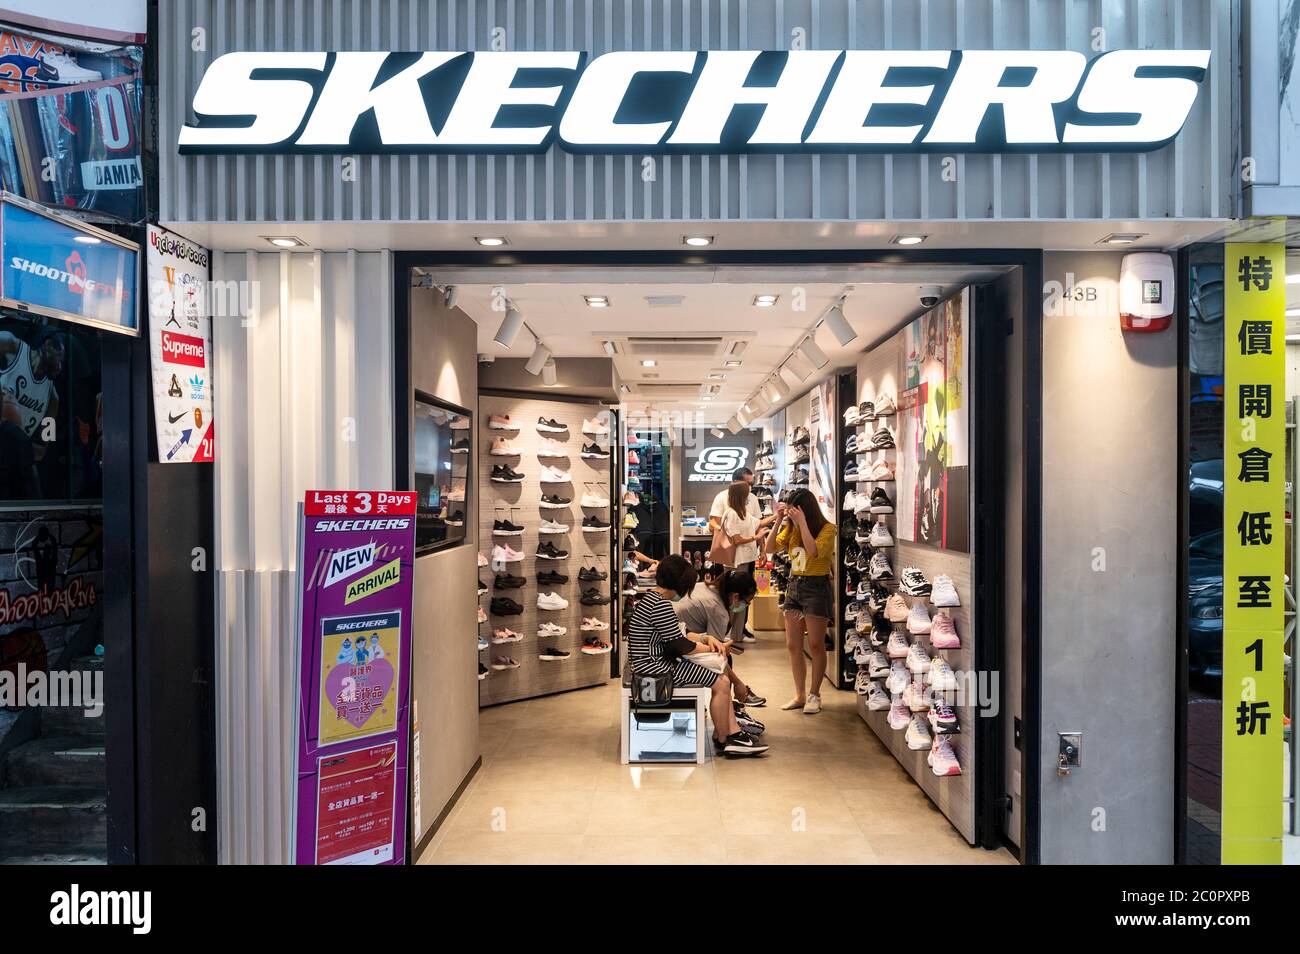 American lifestyle and performance footwear brand Skechers store seen in  Hong Kong Stock Photo - Alamy